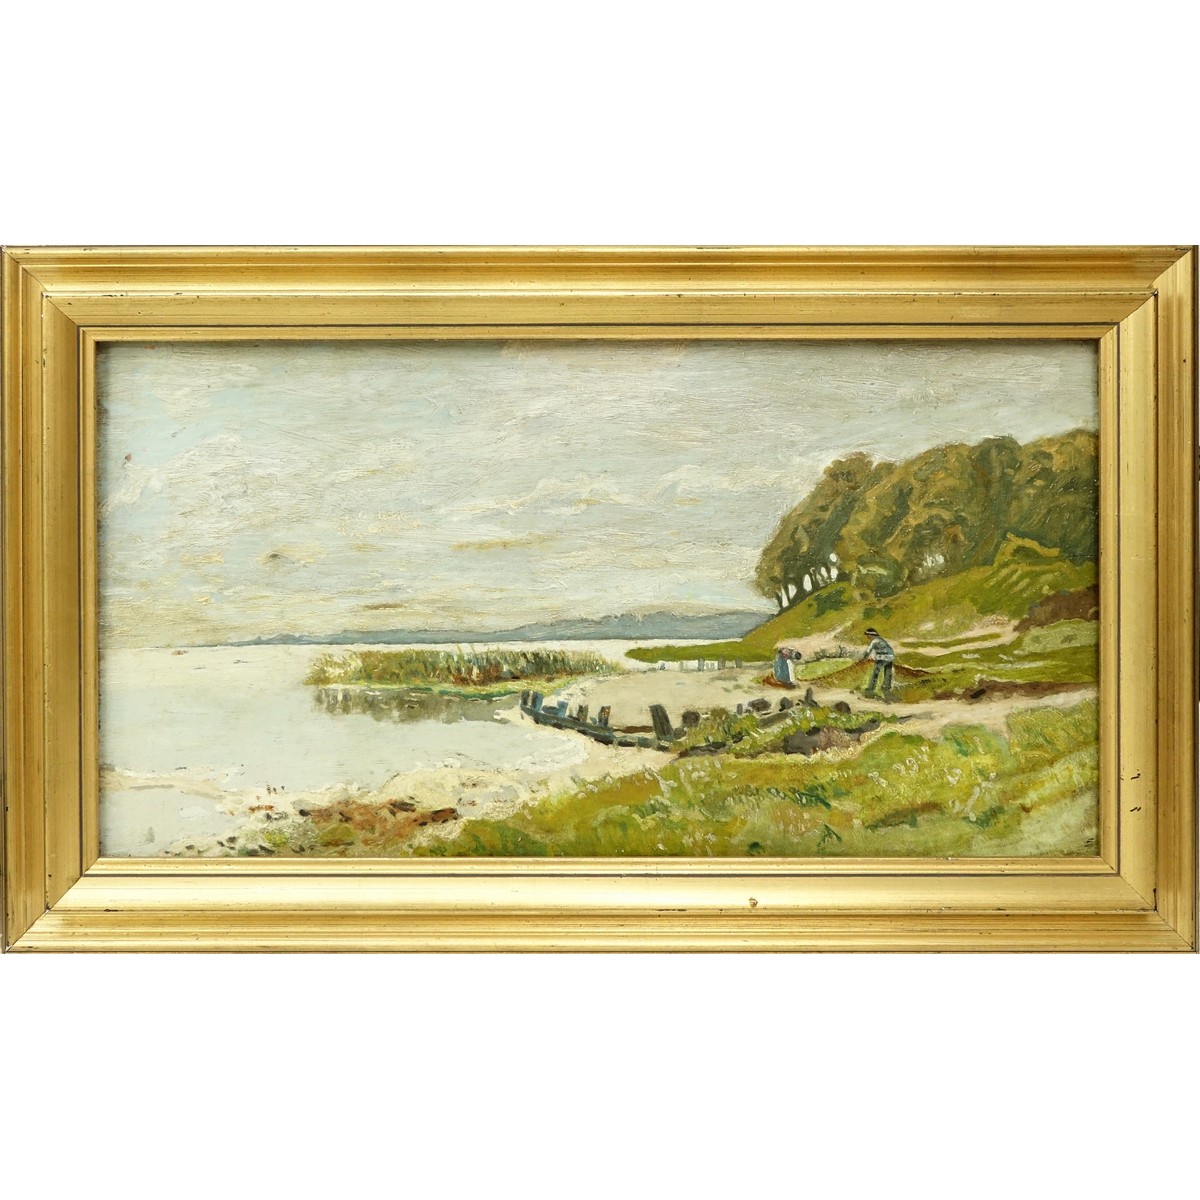 In The Style Of Charles Francois Daubigny, French (1817 - 1878). Oil painting on board "Waterside".